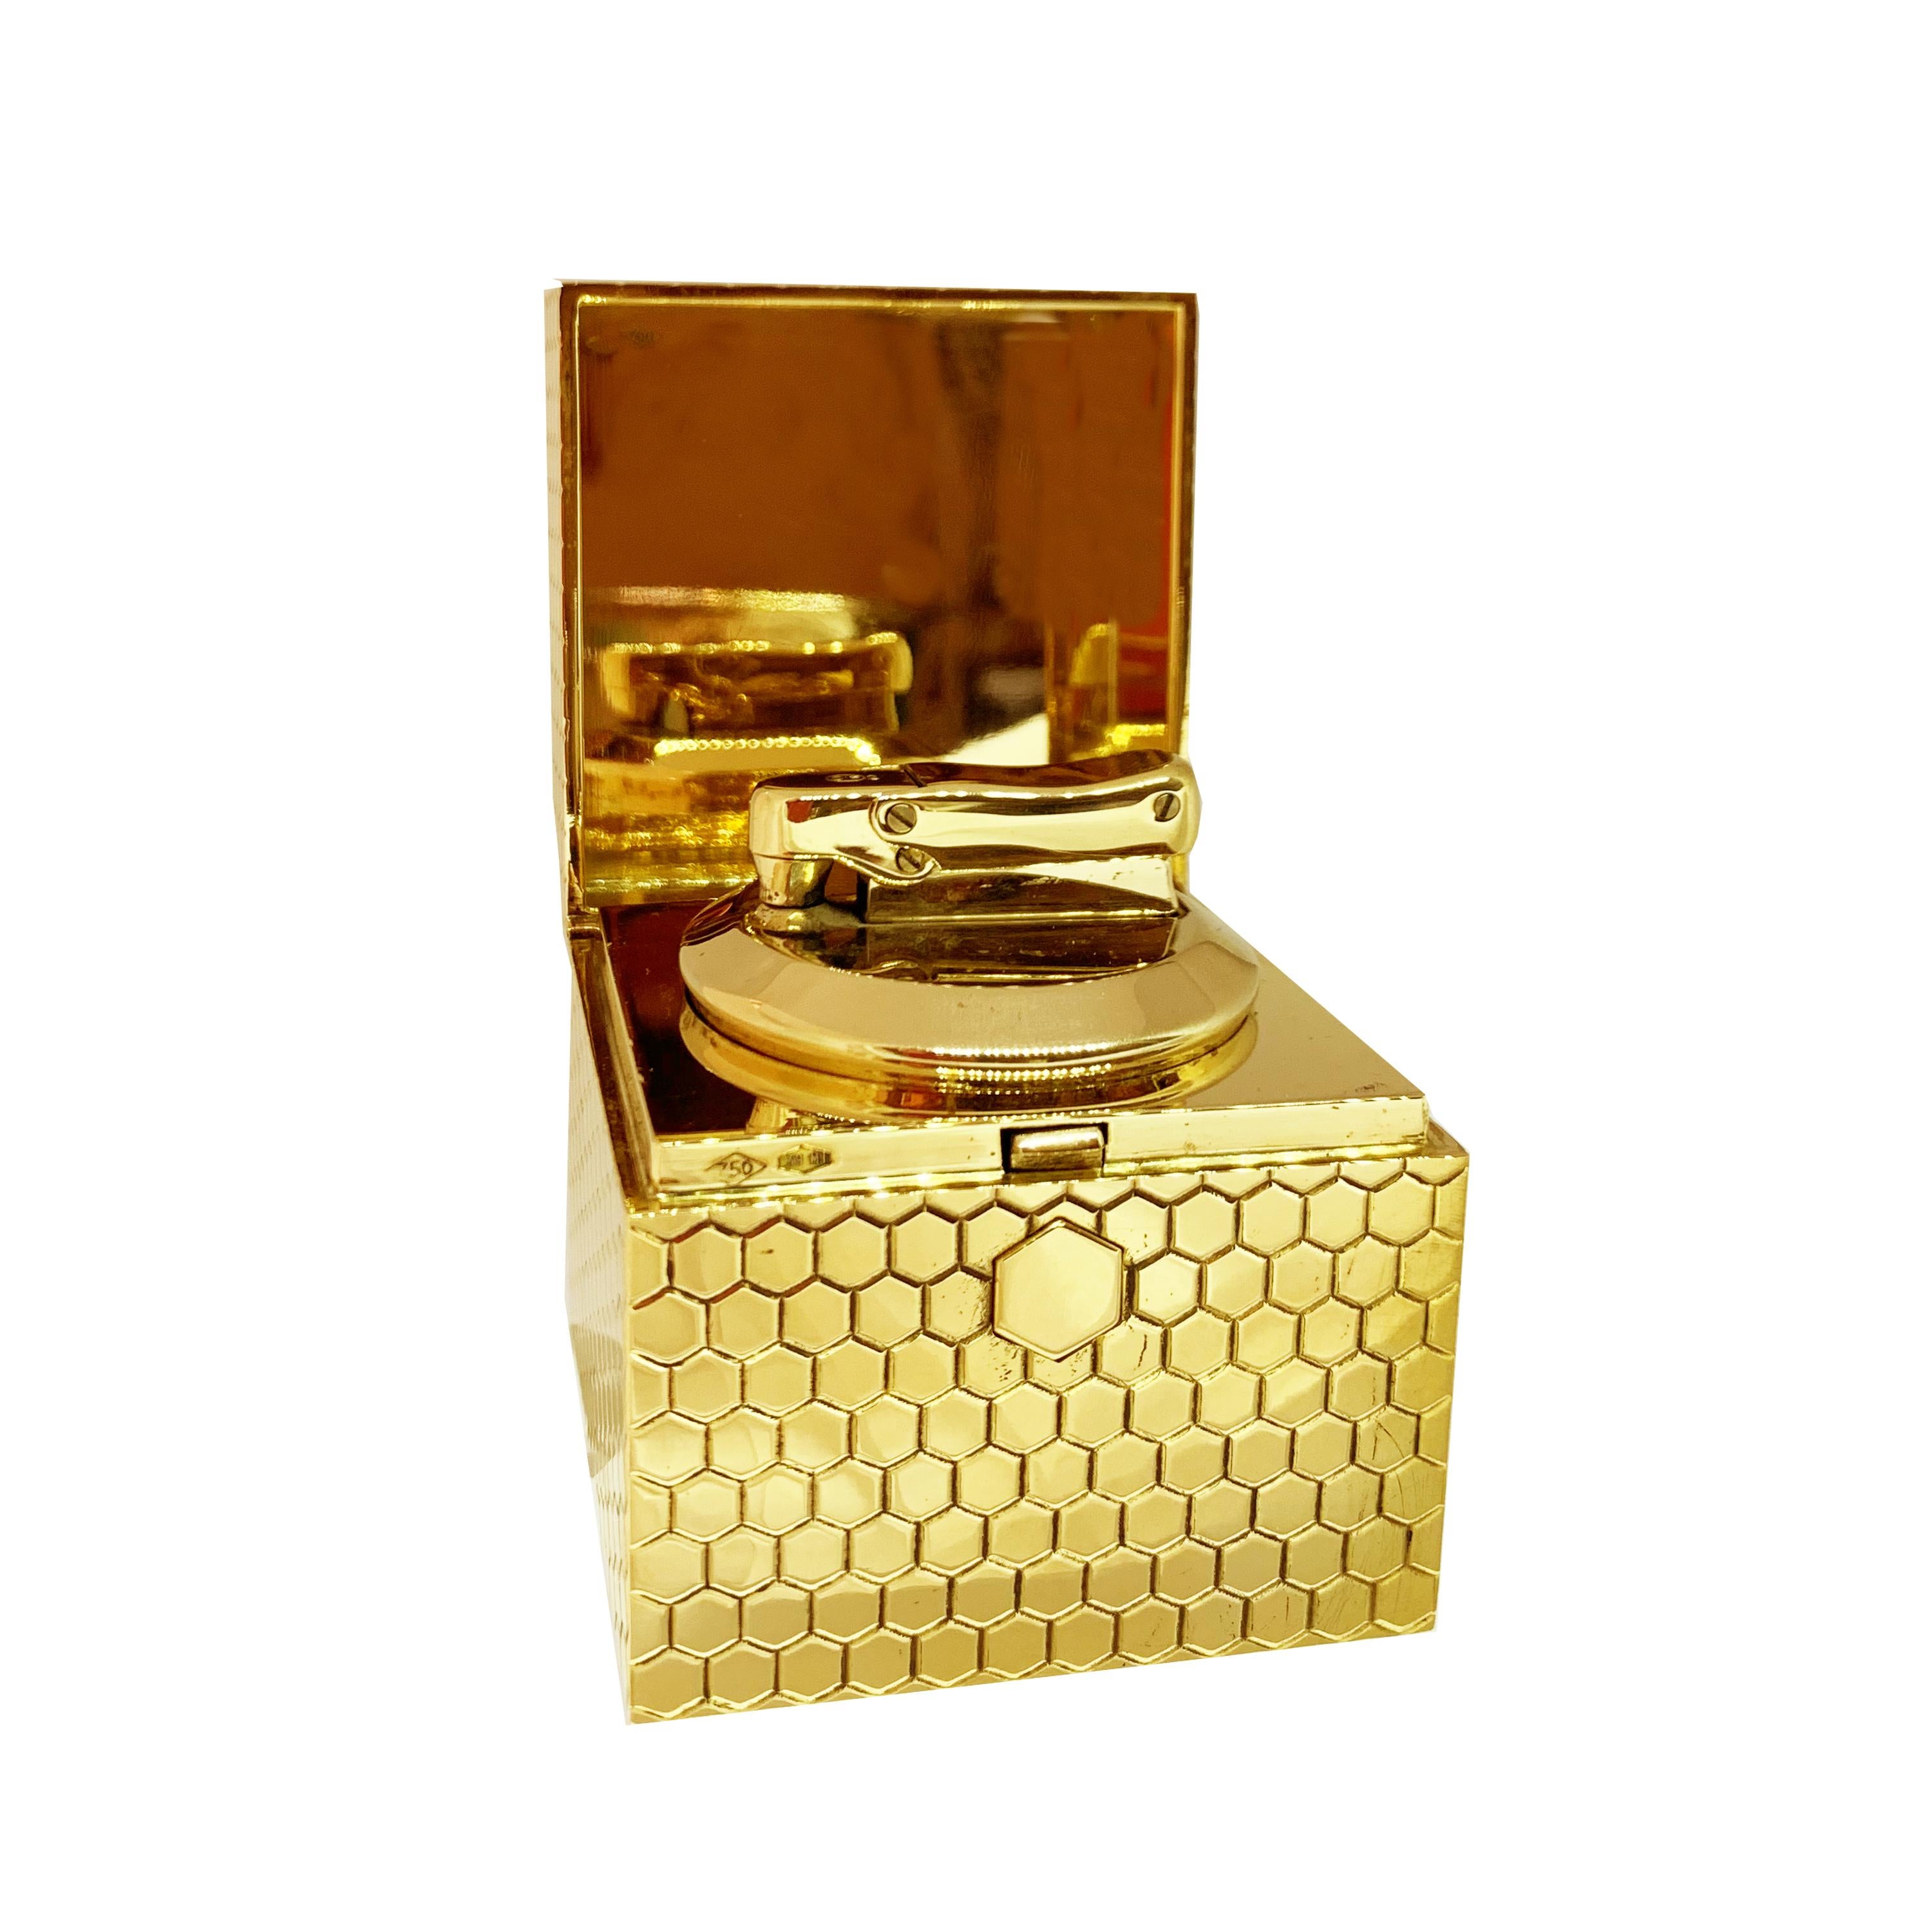 This magnificent 18 kt gold box with internal cigarette lighter, with a valuable hexagonal pattern, was handmade in Italy by skilled craftsmen. It belonged to one of the most important and beloved actors born in Rome, Alberto Sordi... a precious